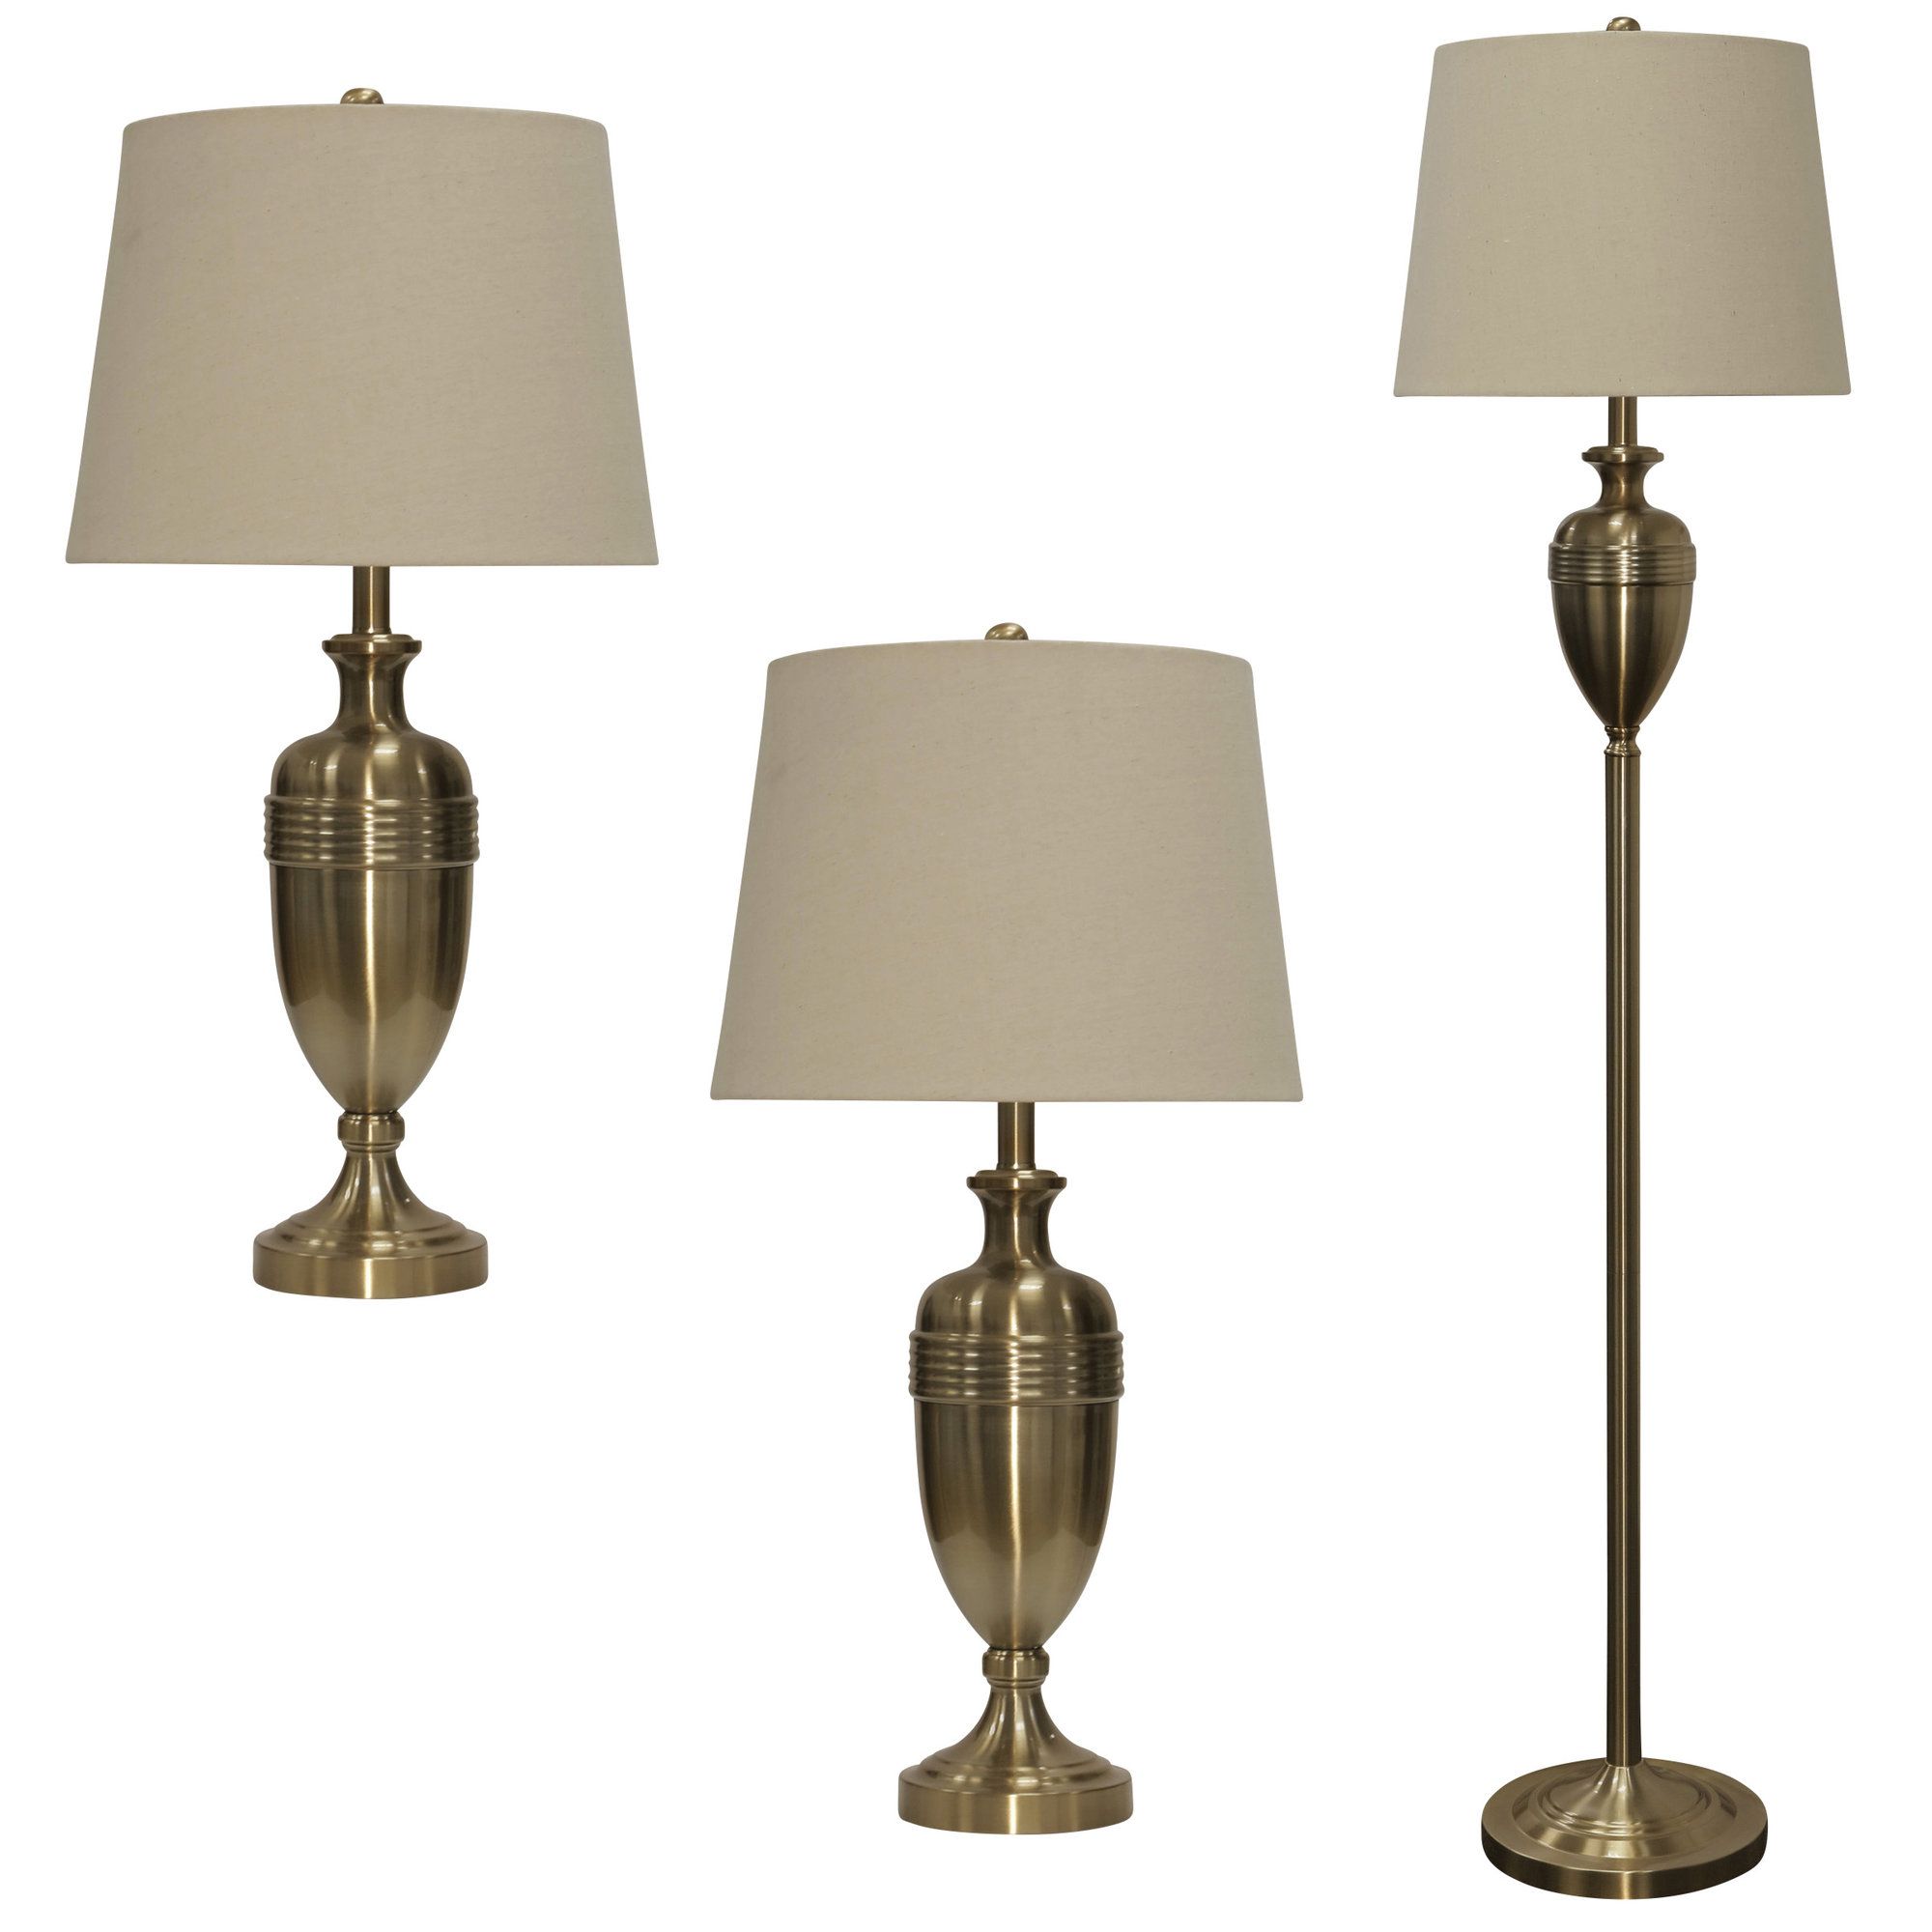 Details About Charlton Home Carl 3 Piece Table And Floor Lamp Set For 4 Piece Wall Decor Sets By Charlton Home (View 30 of 30)